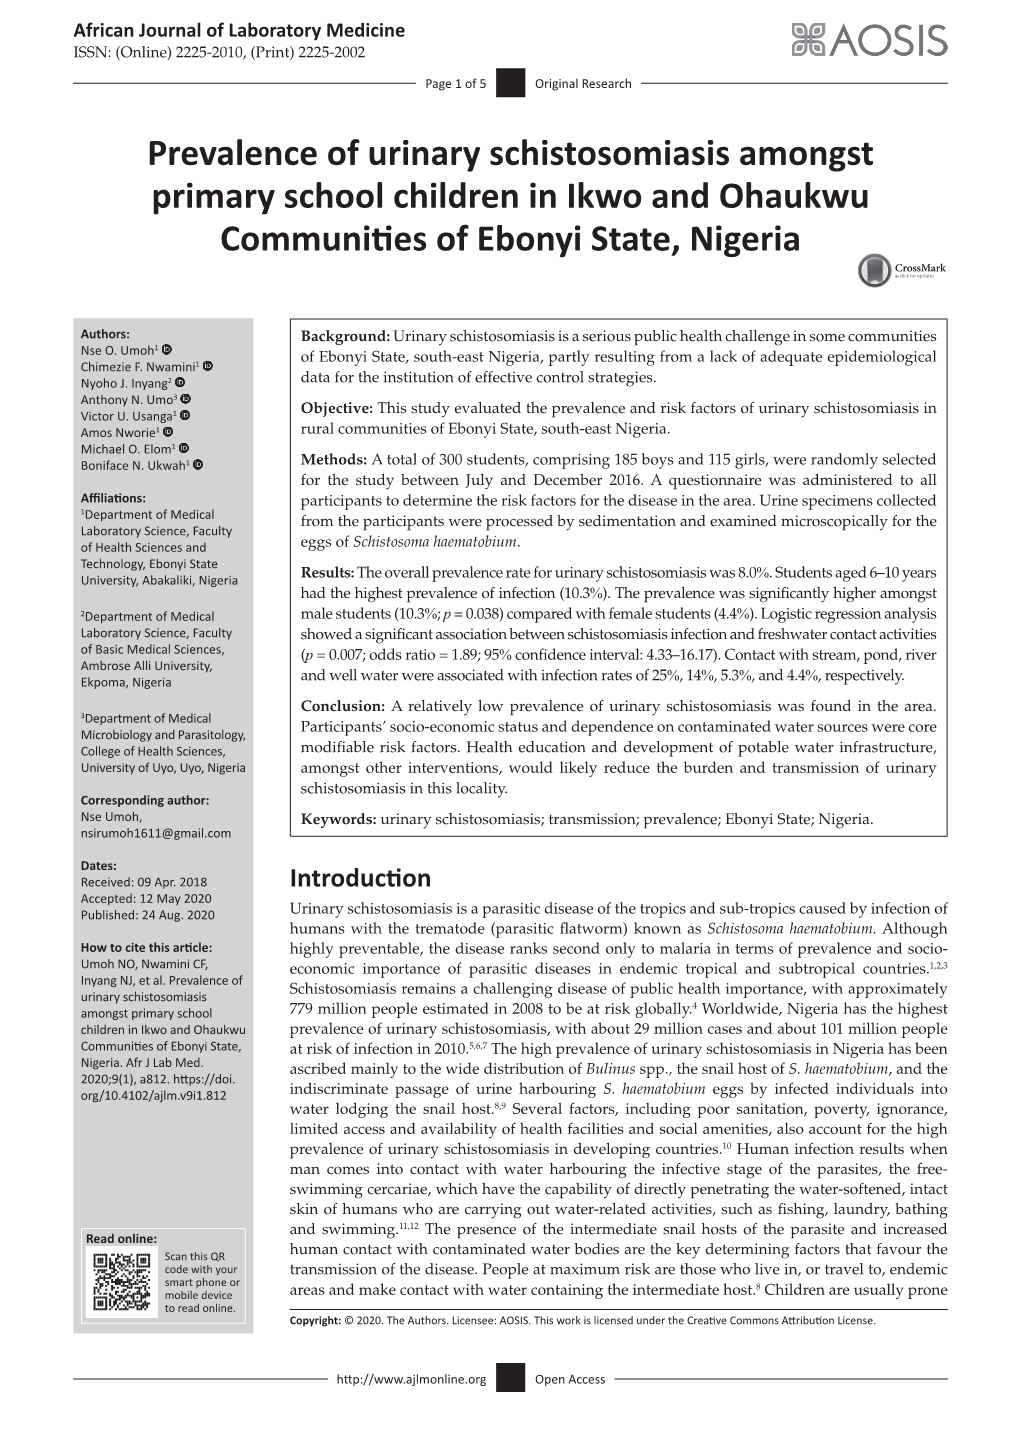 Prevalence of Urinary Schistosomiasis Amongst Primary School Children in Ikwo and Ohaukwu Communities of Ebonyi State, Nigeria